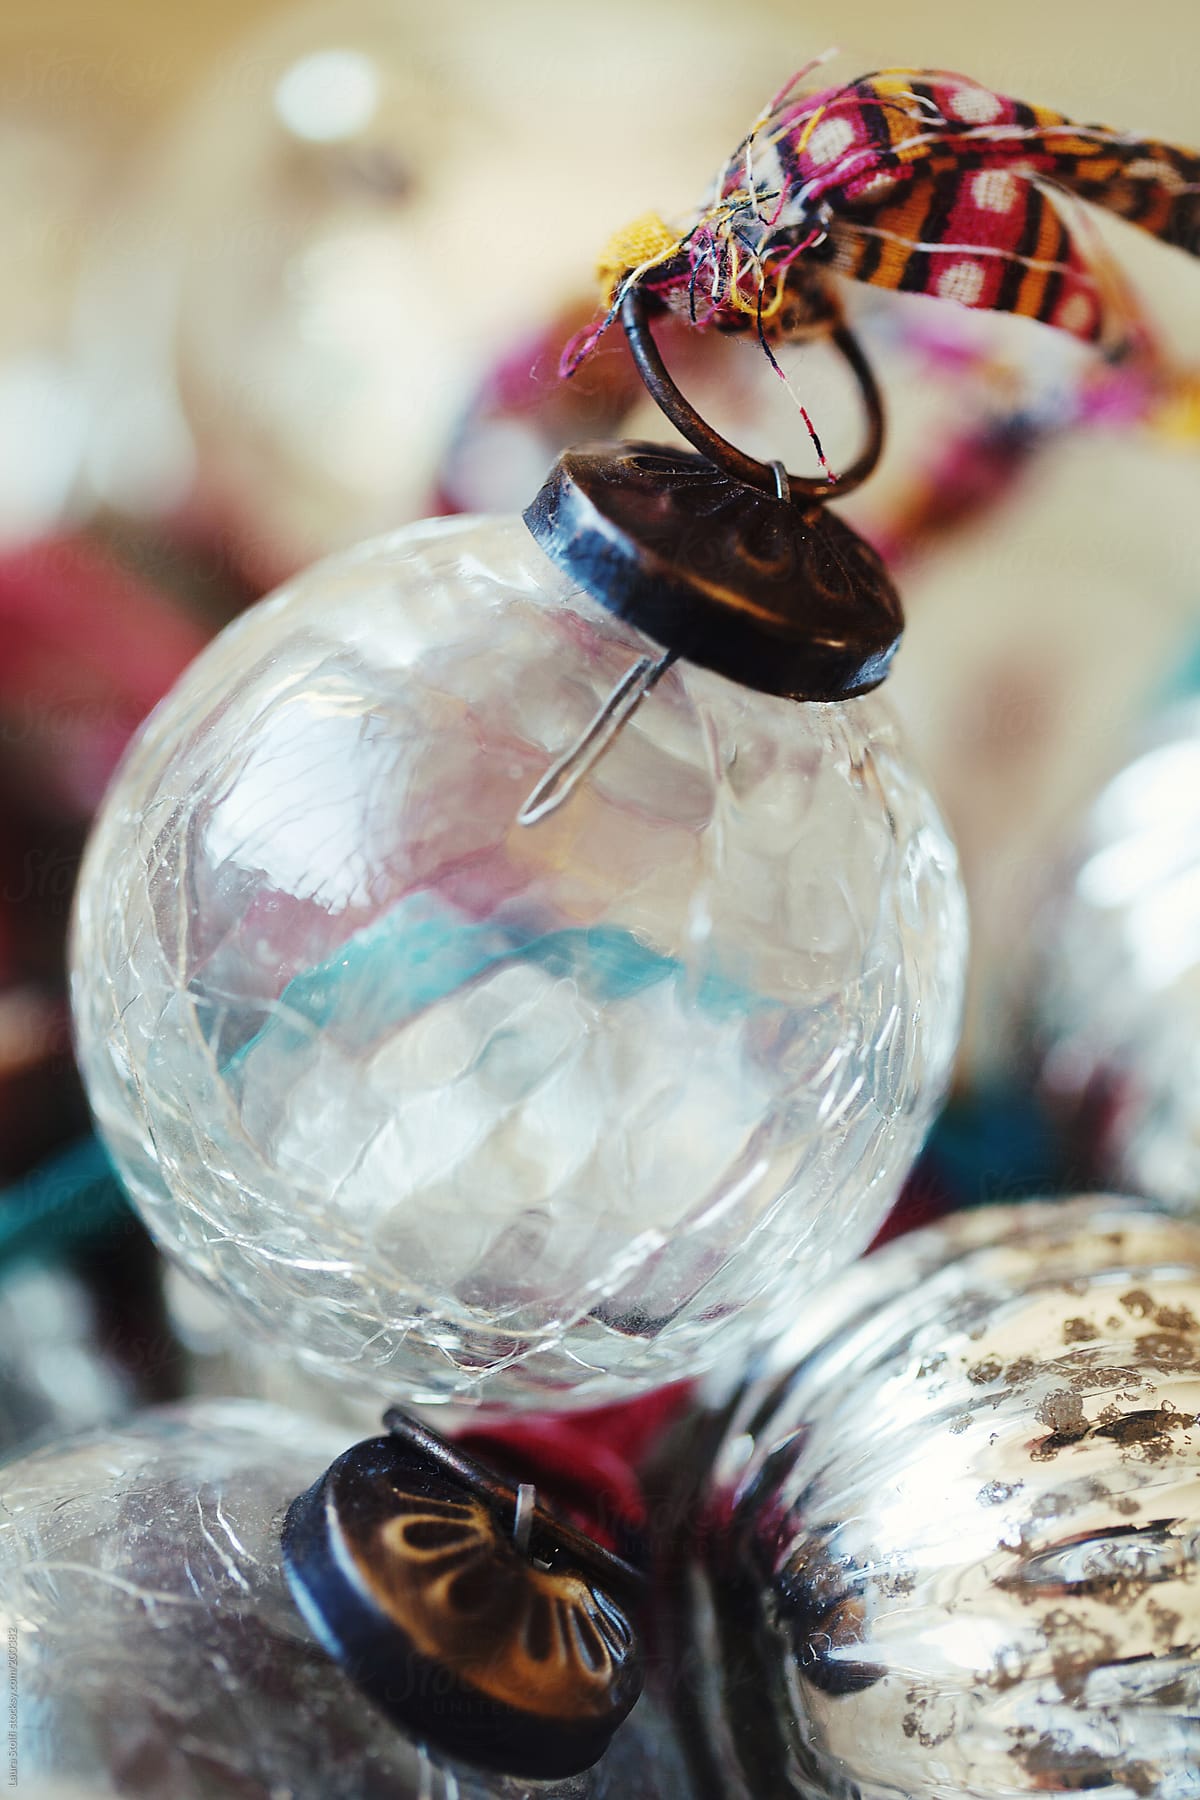 Extreme close-up of vintage Christmas glass bauble